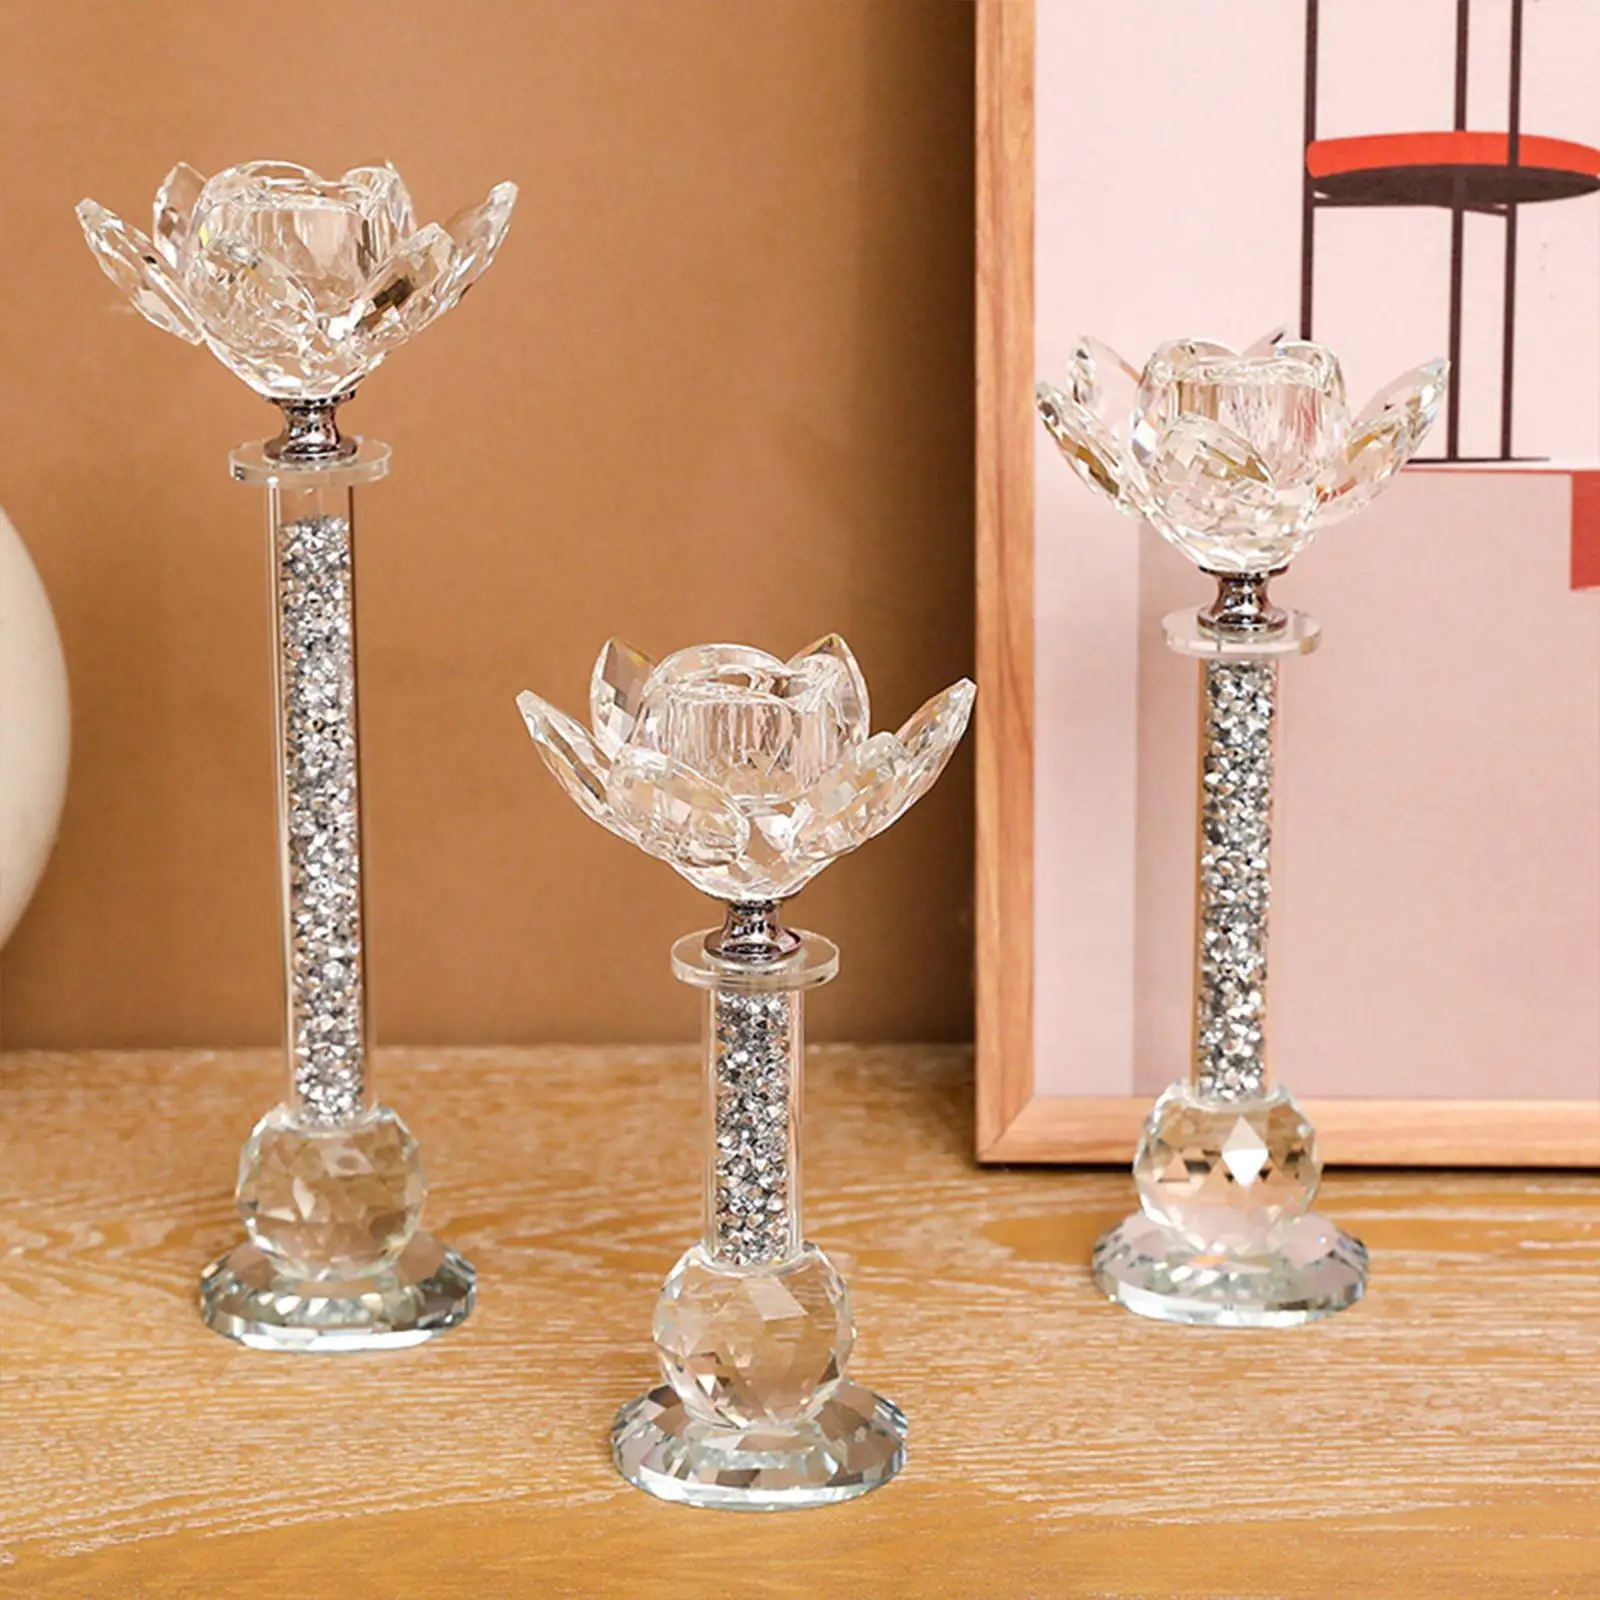 3Pcs Pillar Candle Holder Candlestick European Elegant Votive Candle Stand for Home Table Centerpiece Party Decoration Gift